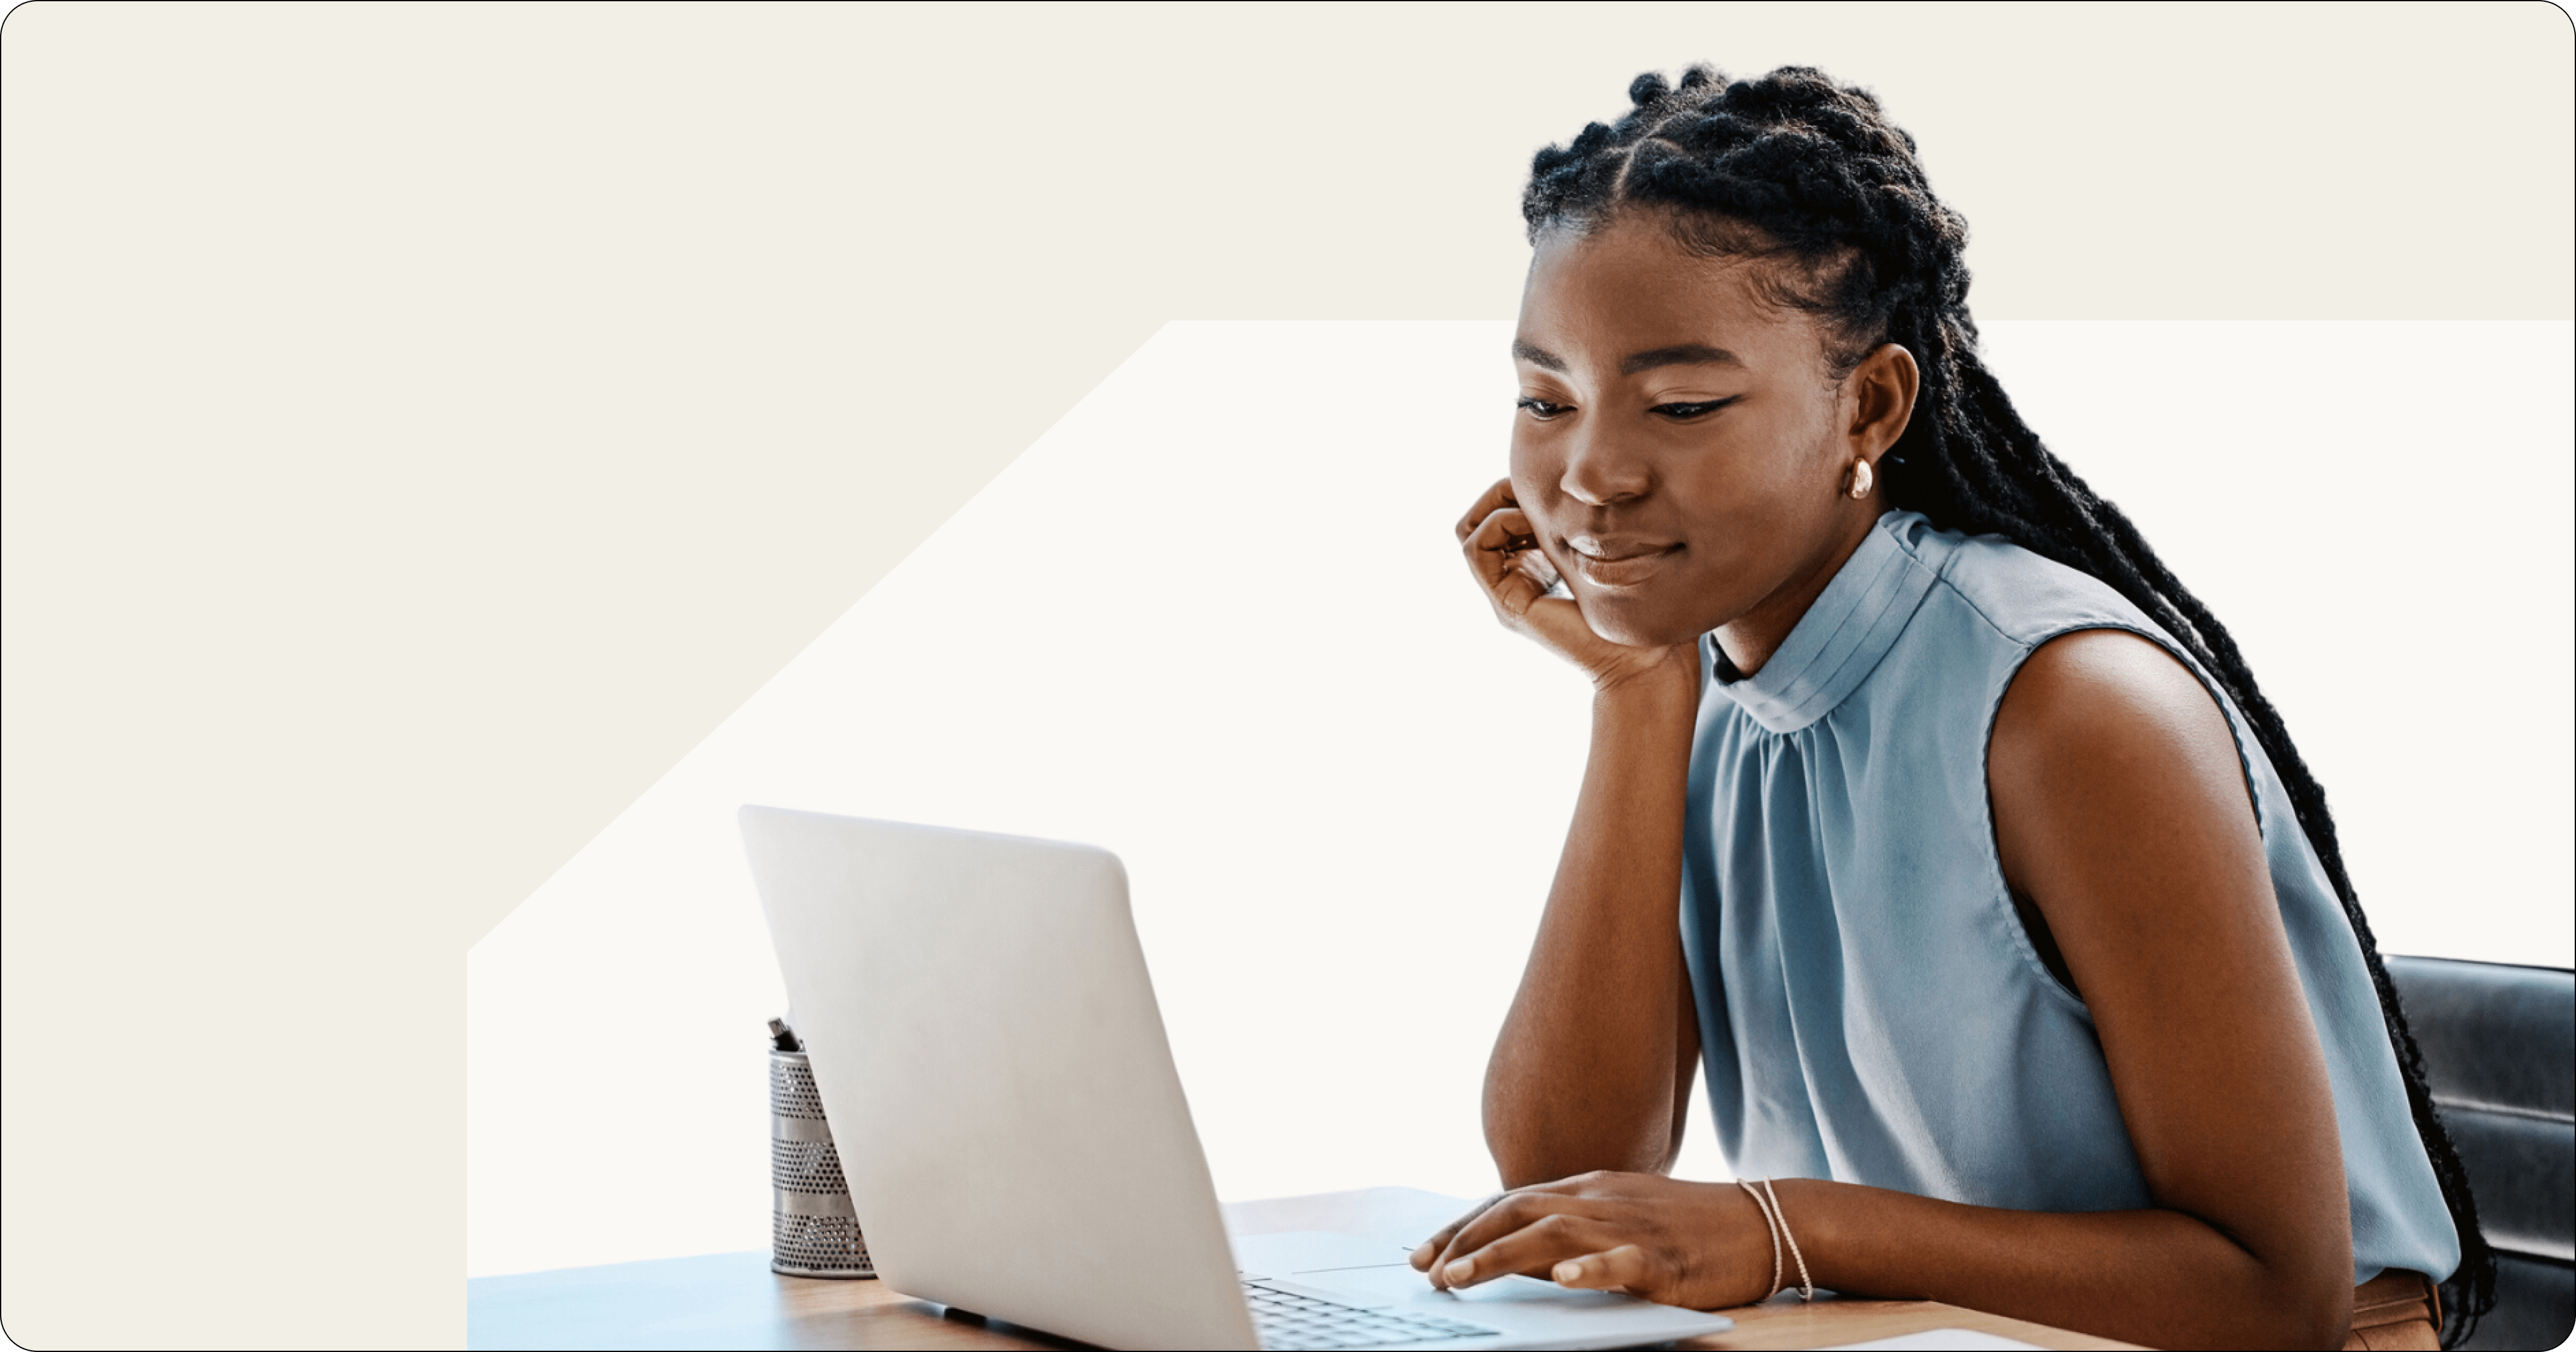 young black woman logging into laptop in office setting